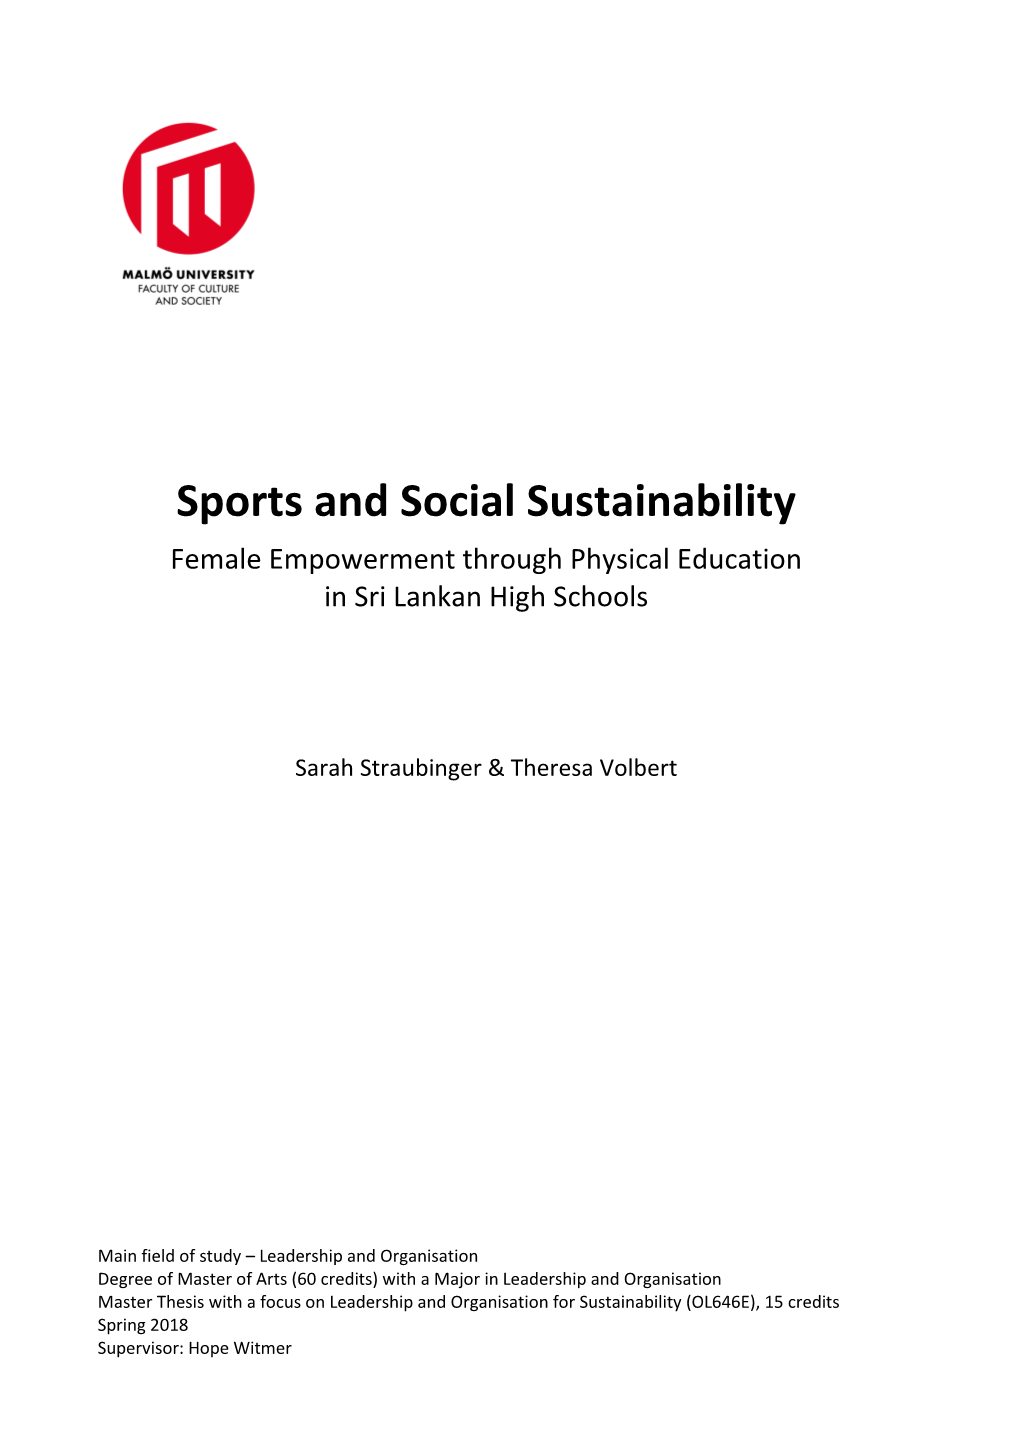 Sports and Social Sustainability Female Empowerment Through Physical Education in Sri Lankan High Schools